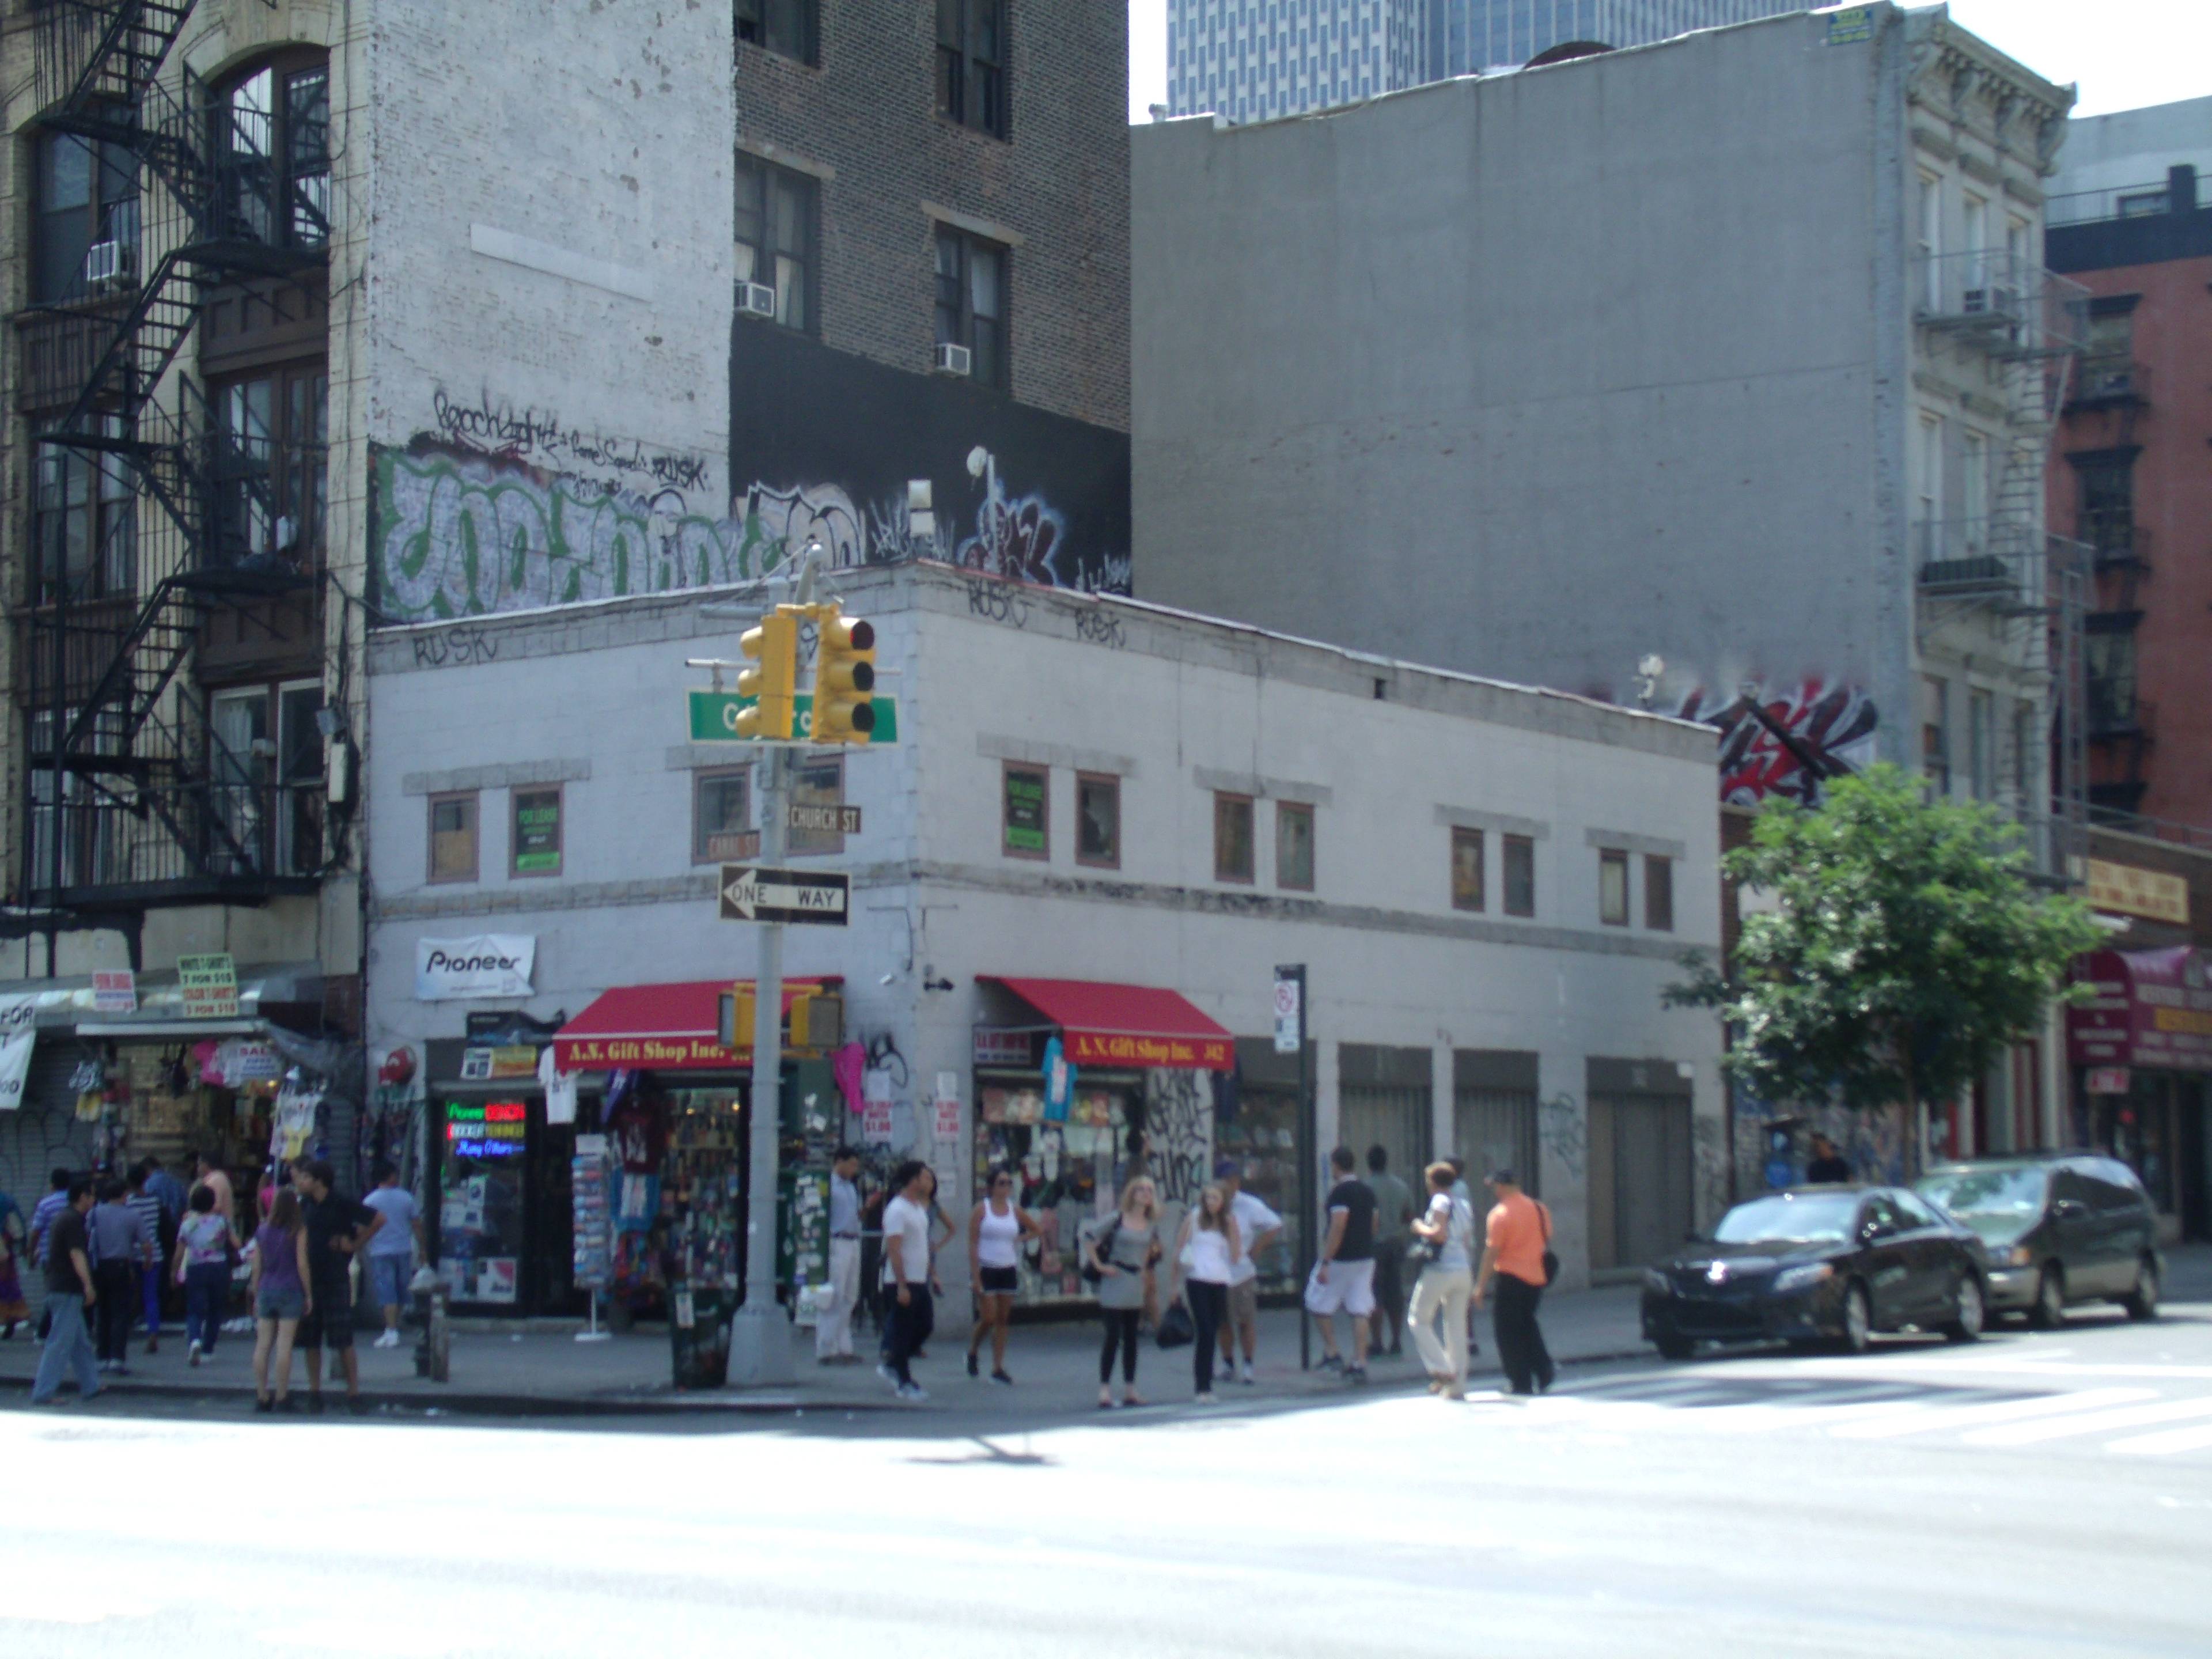 Canal Street  Retail Storefront for Rent - High Traffic Location in Manhattan! Will Build to Suit!  Possible Sale!  Other properties available in all Areas of NYC